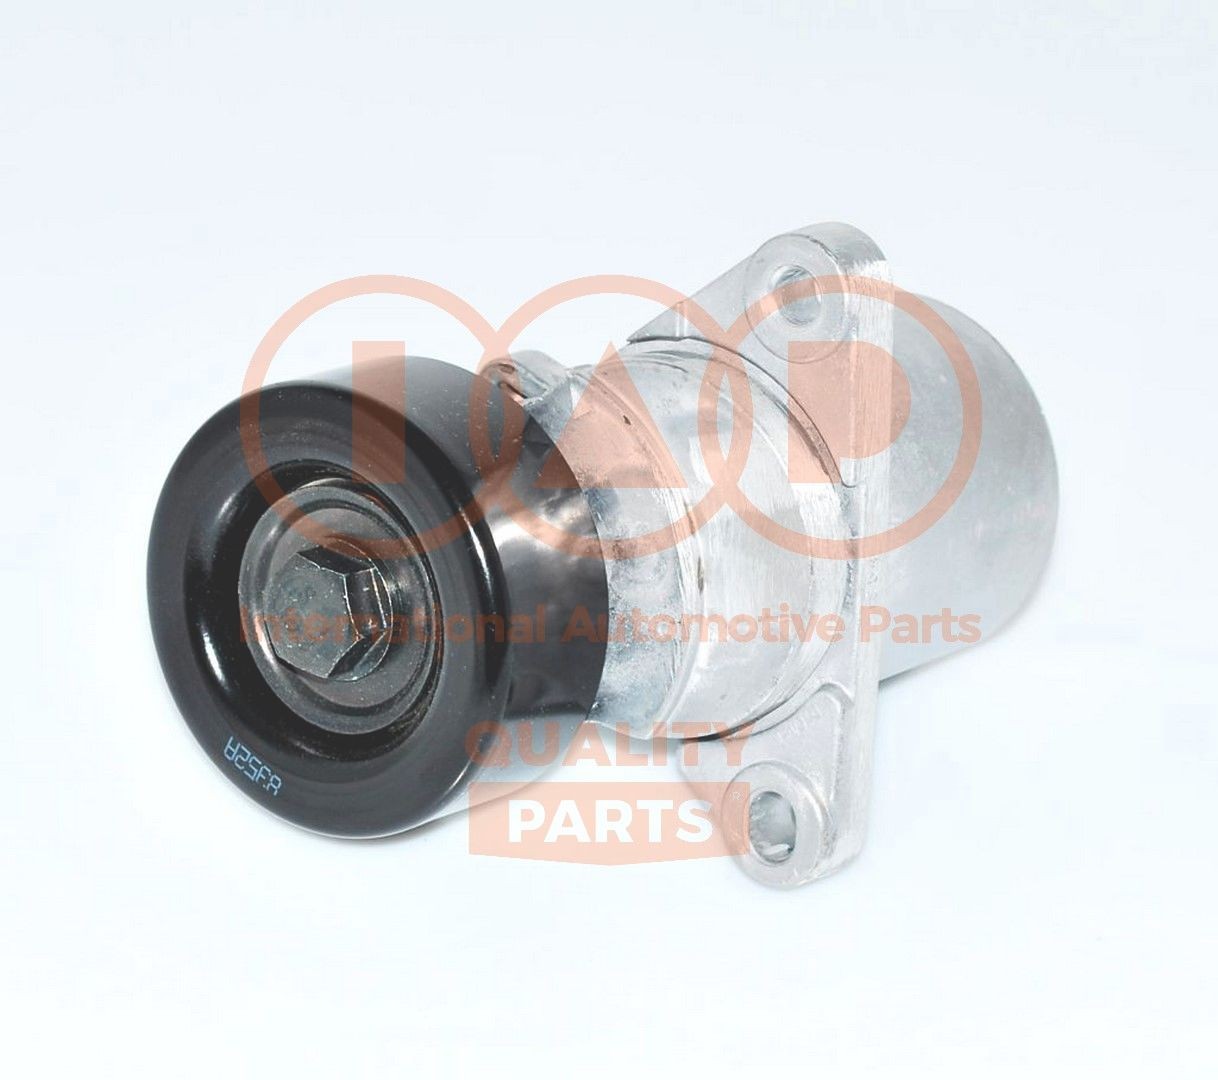 IAP QUALITY PARTS 127-07175 Tensioner pulley 25281 27010